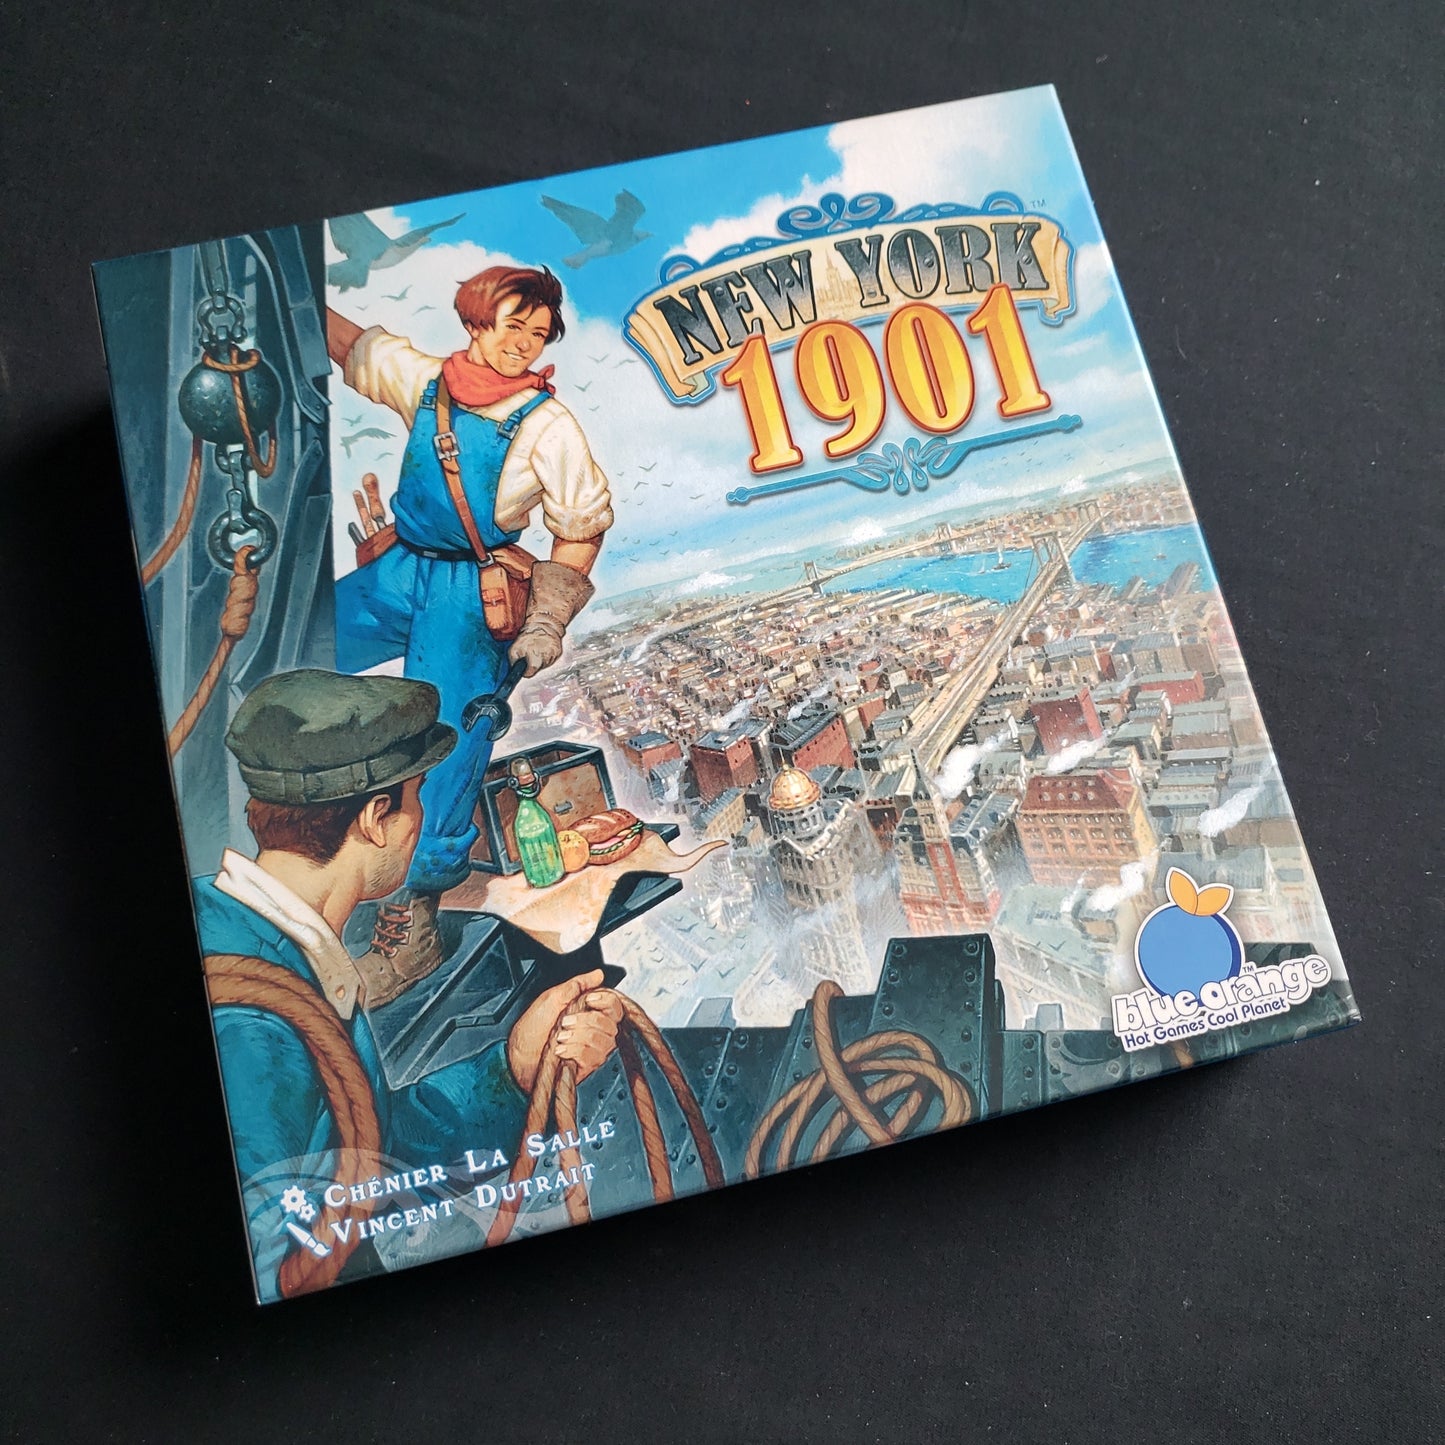 Image shows the front cover of the box of the New York 1901 board game